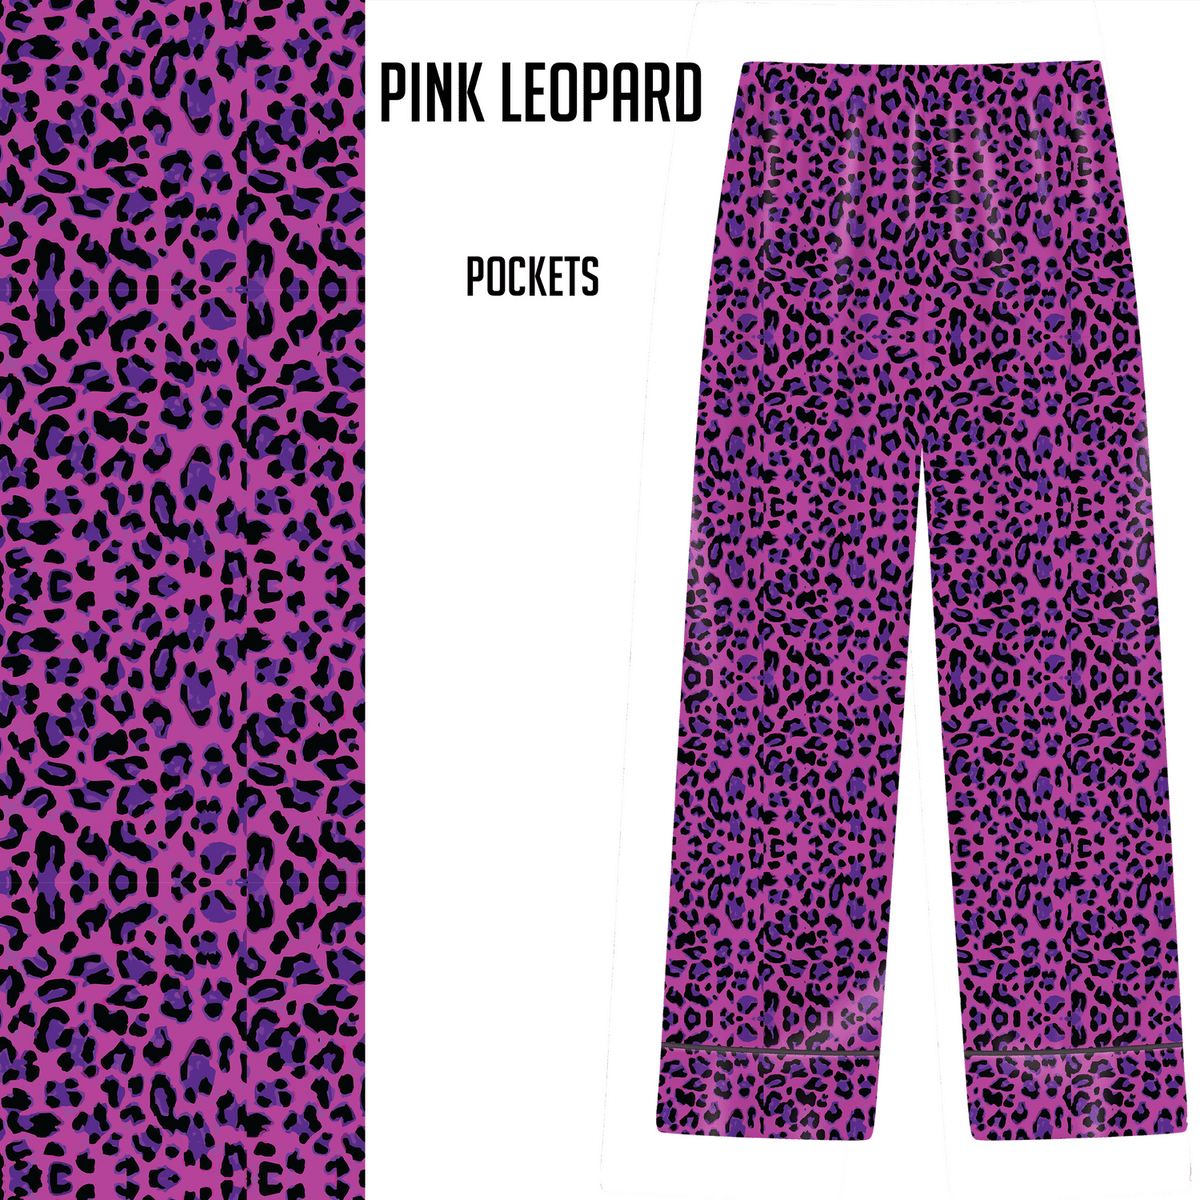 Pink Leopard Lounge Pants with Pockets